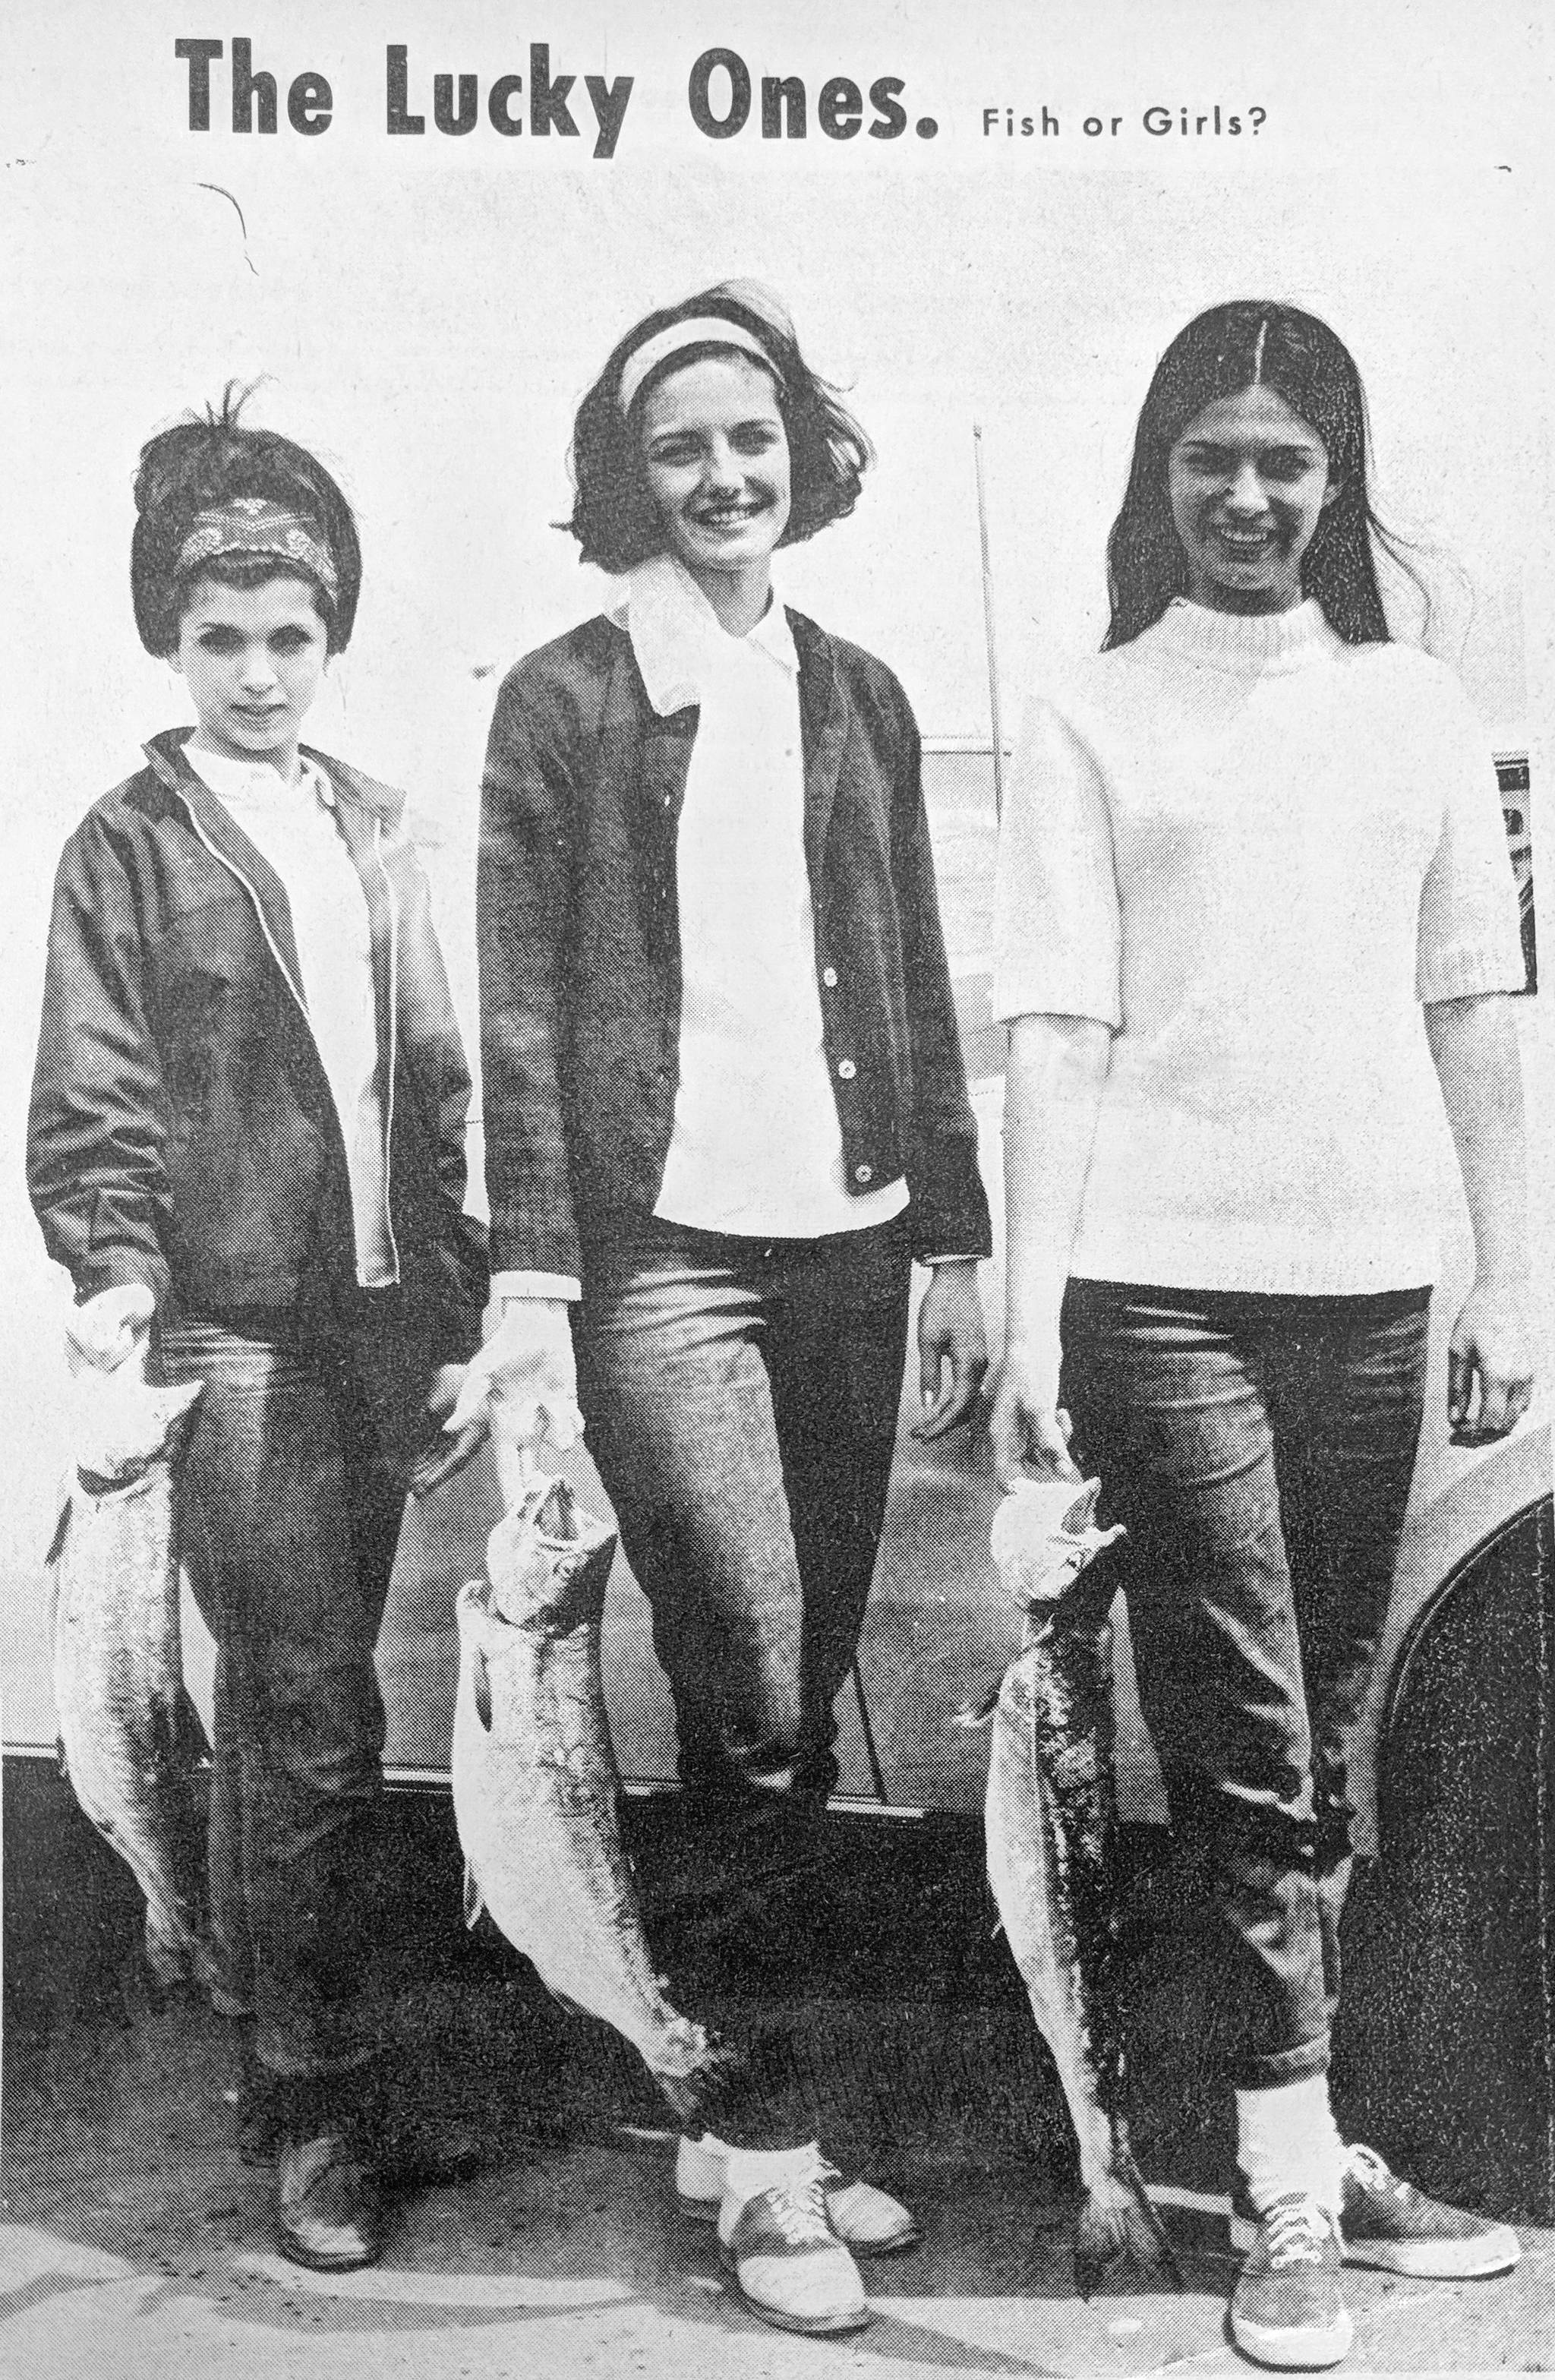 From the May 23, 1968, issue of The Vidette: “The Lucky Ones. Fish or Girls? — Either the salmon caught the girls or the local beauties caught the salmon. Either way, three of the lucky pageant entrants pose with their fish. Left to right are Dixie Marbut, Dorene Taylor and Laura Jurasin.”